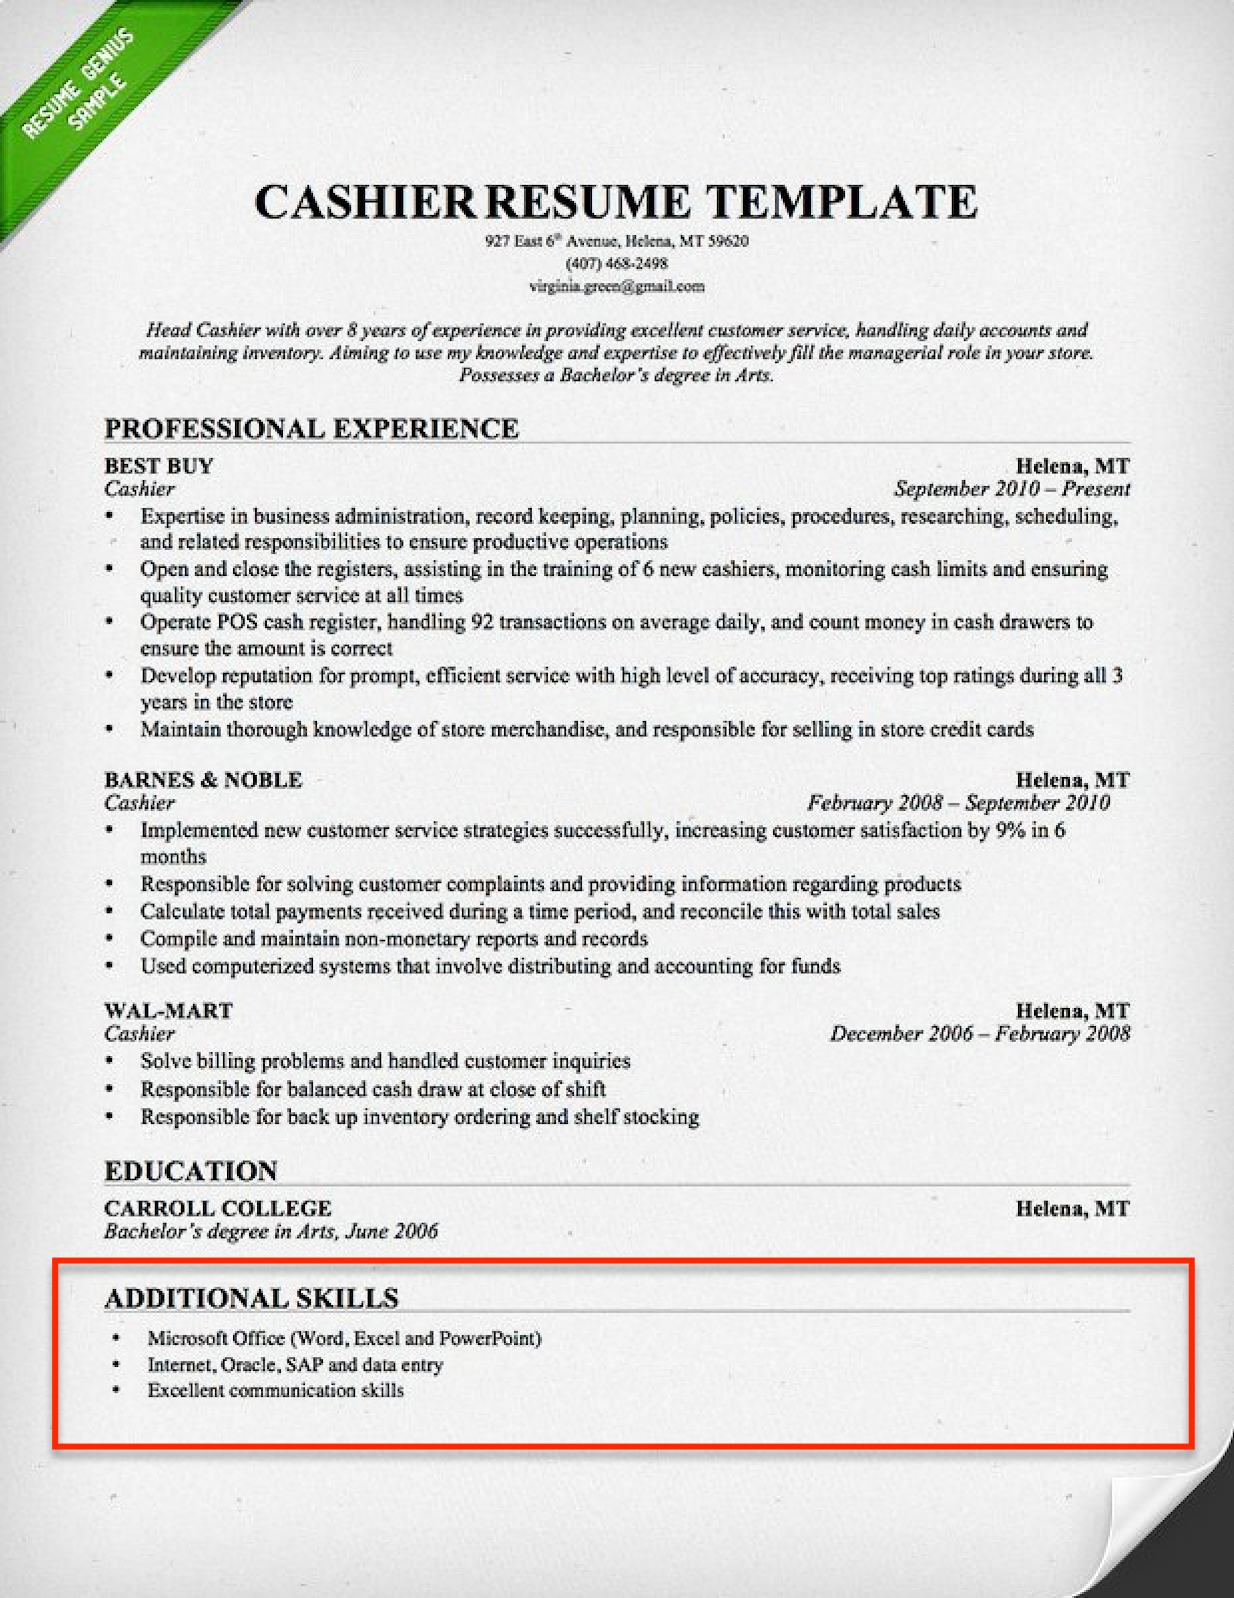 Resume Skills Section 250 Skills For Your Resume Resumegenius inside proportions 1234 X 1598